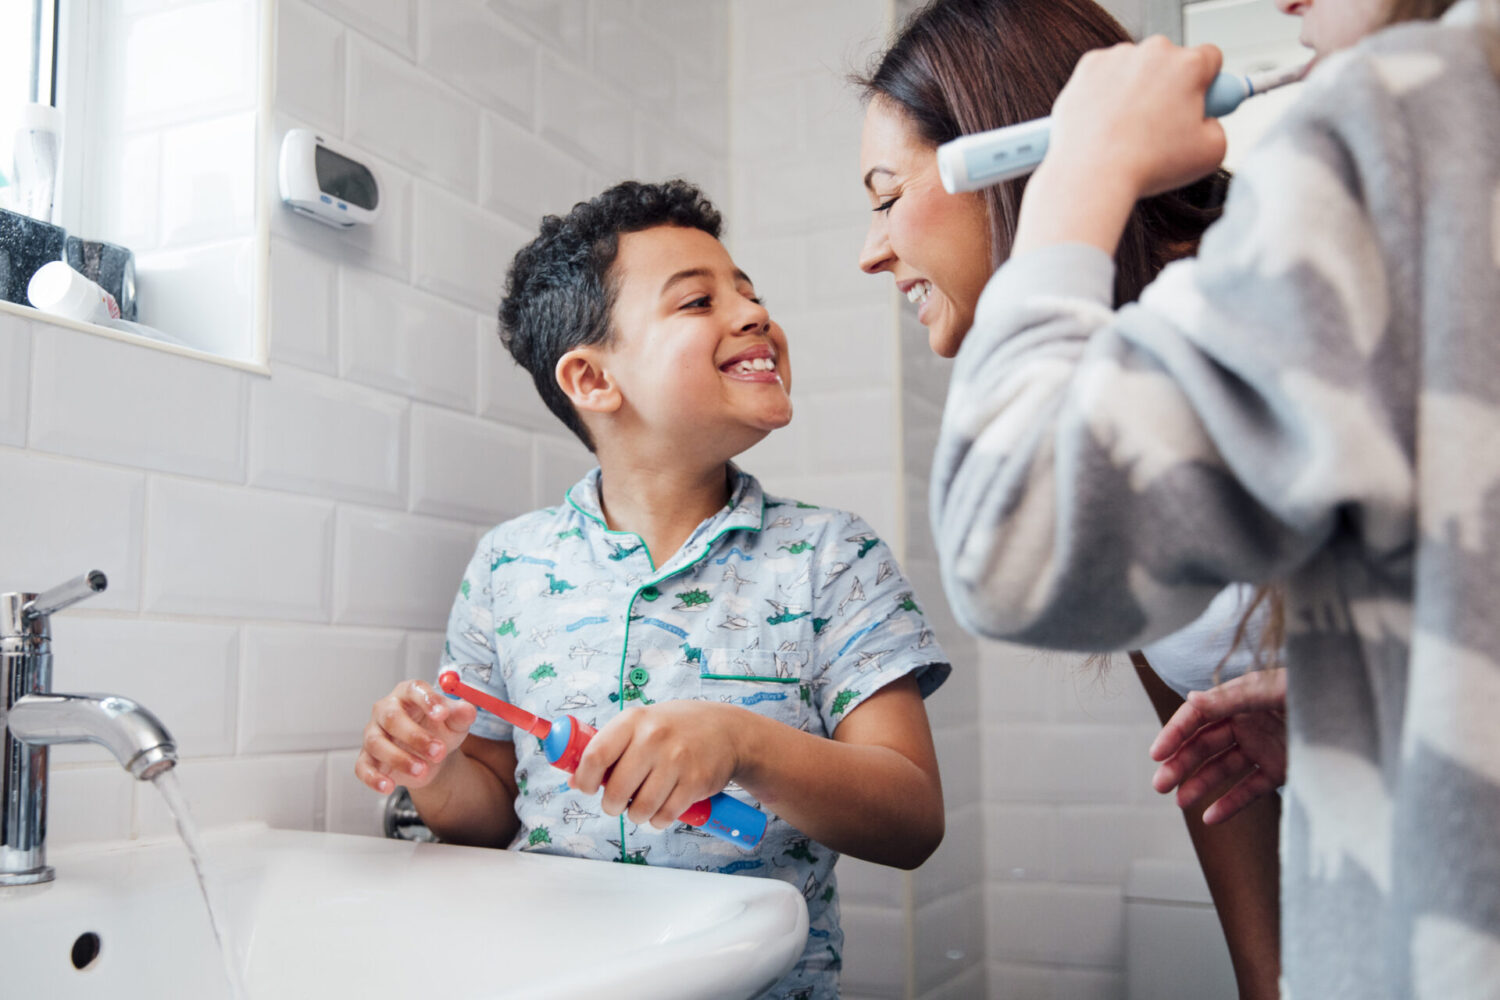 Young boy smiles at his mom after brushing his teeth at the bathroom sink